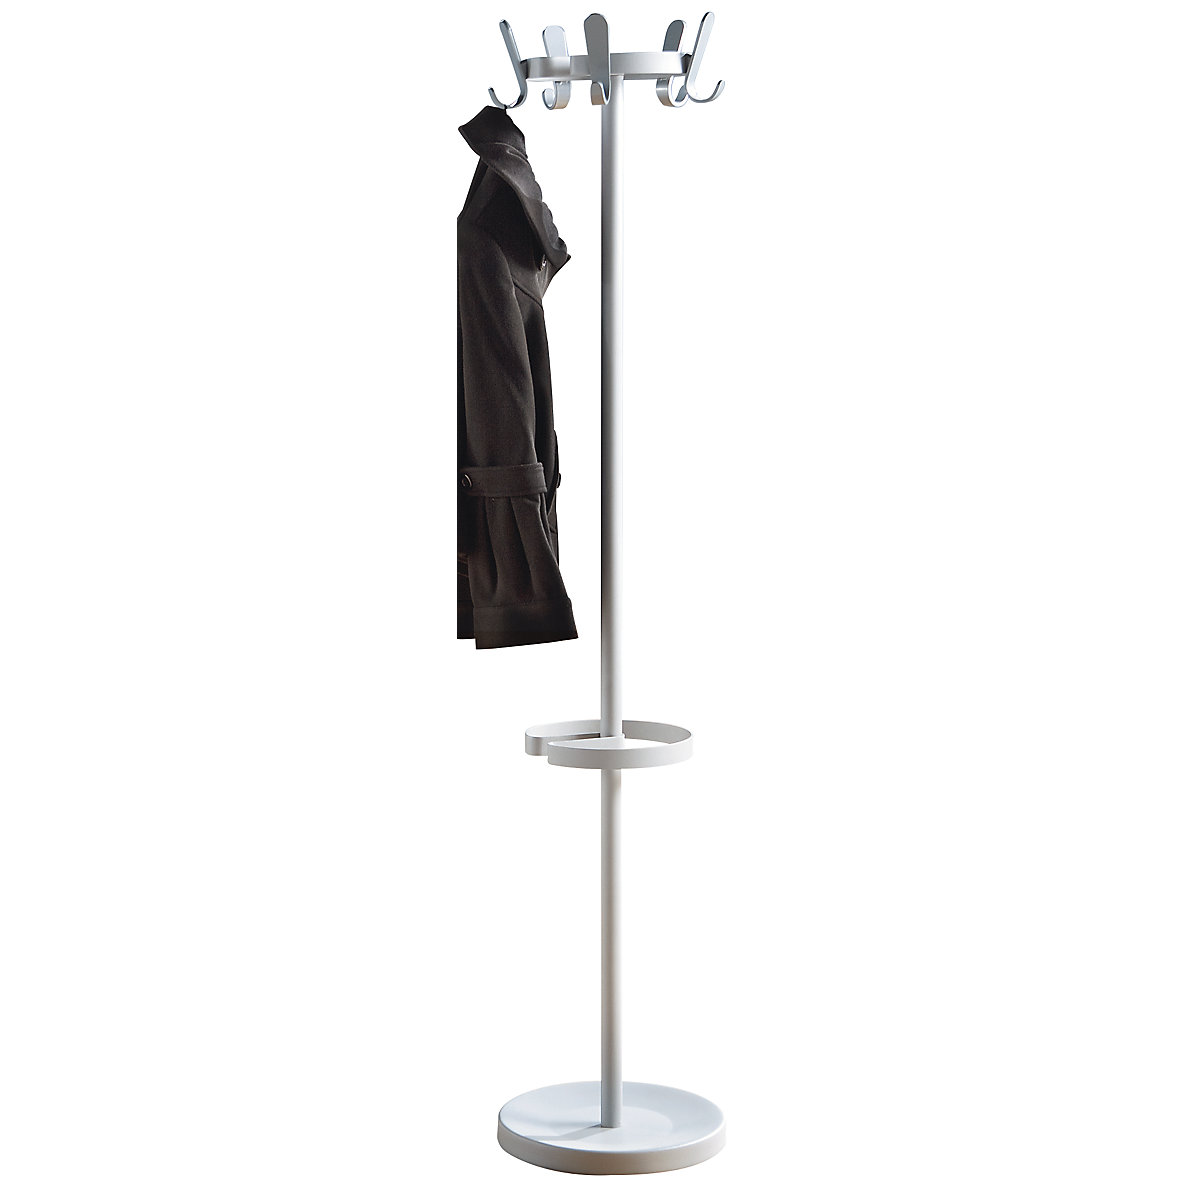 Coat stand with 5 hooks – eurokraft pro, height 1680 mm, Ø 350 mm, hook colour silver-3